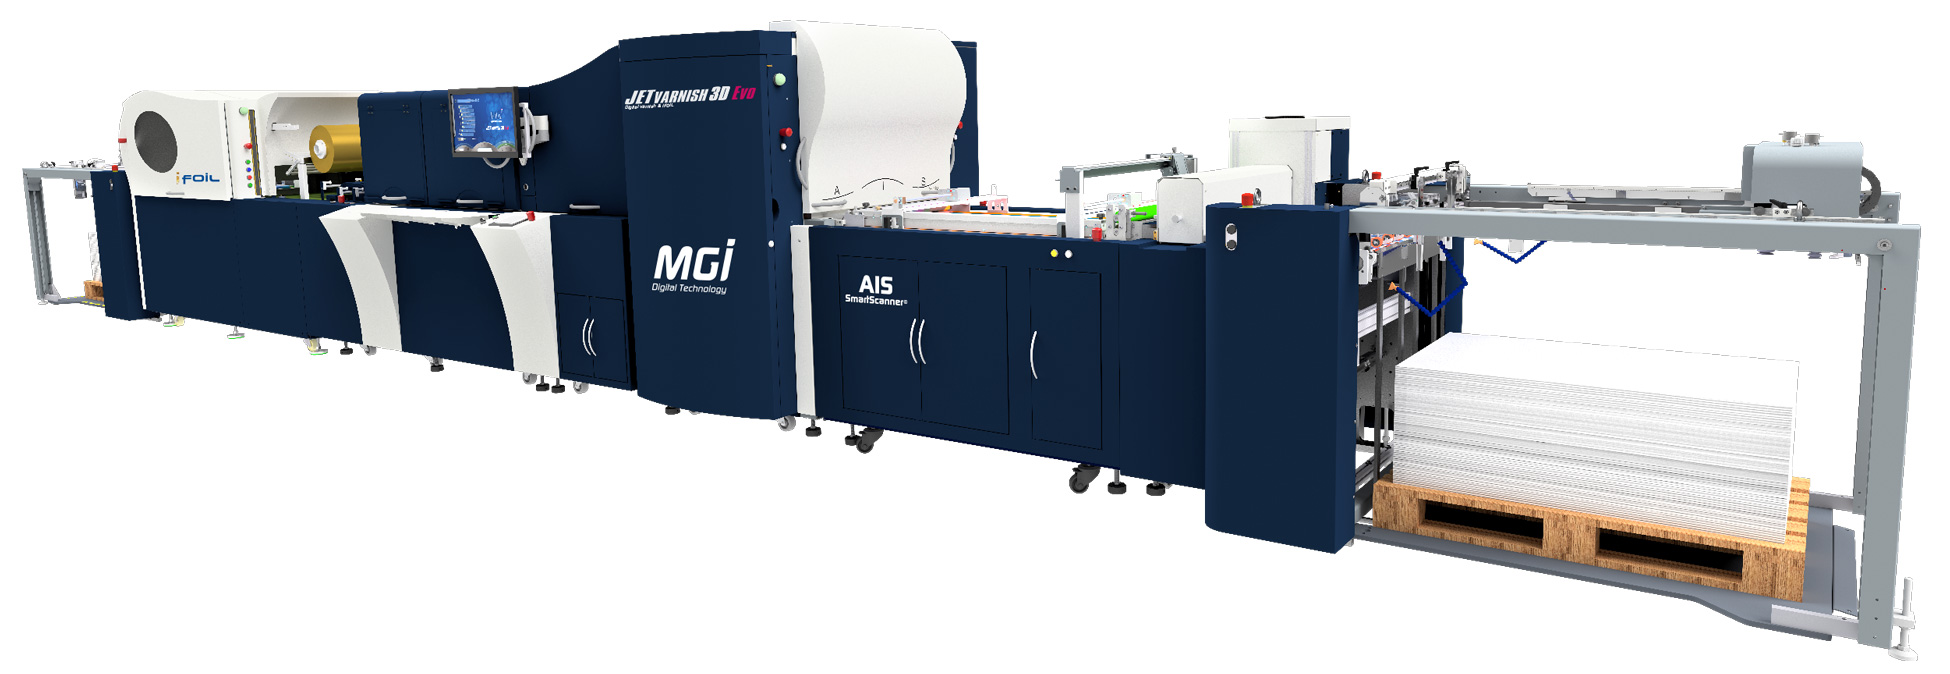 JETvarnish 3D Evo, picture of the MGI Digital Technology equipment seen from the front